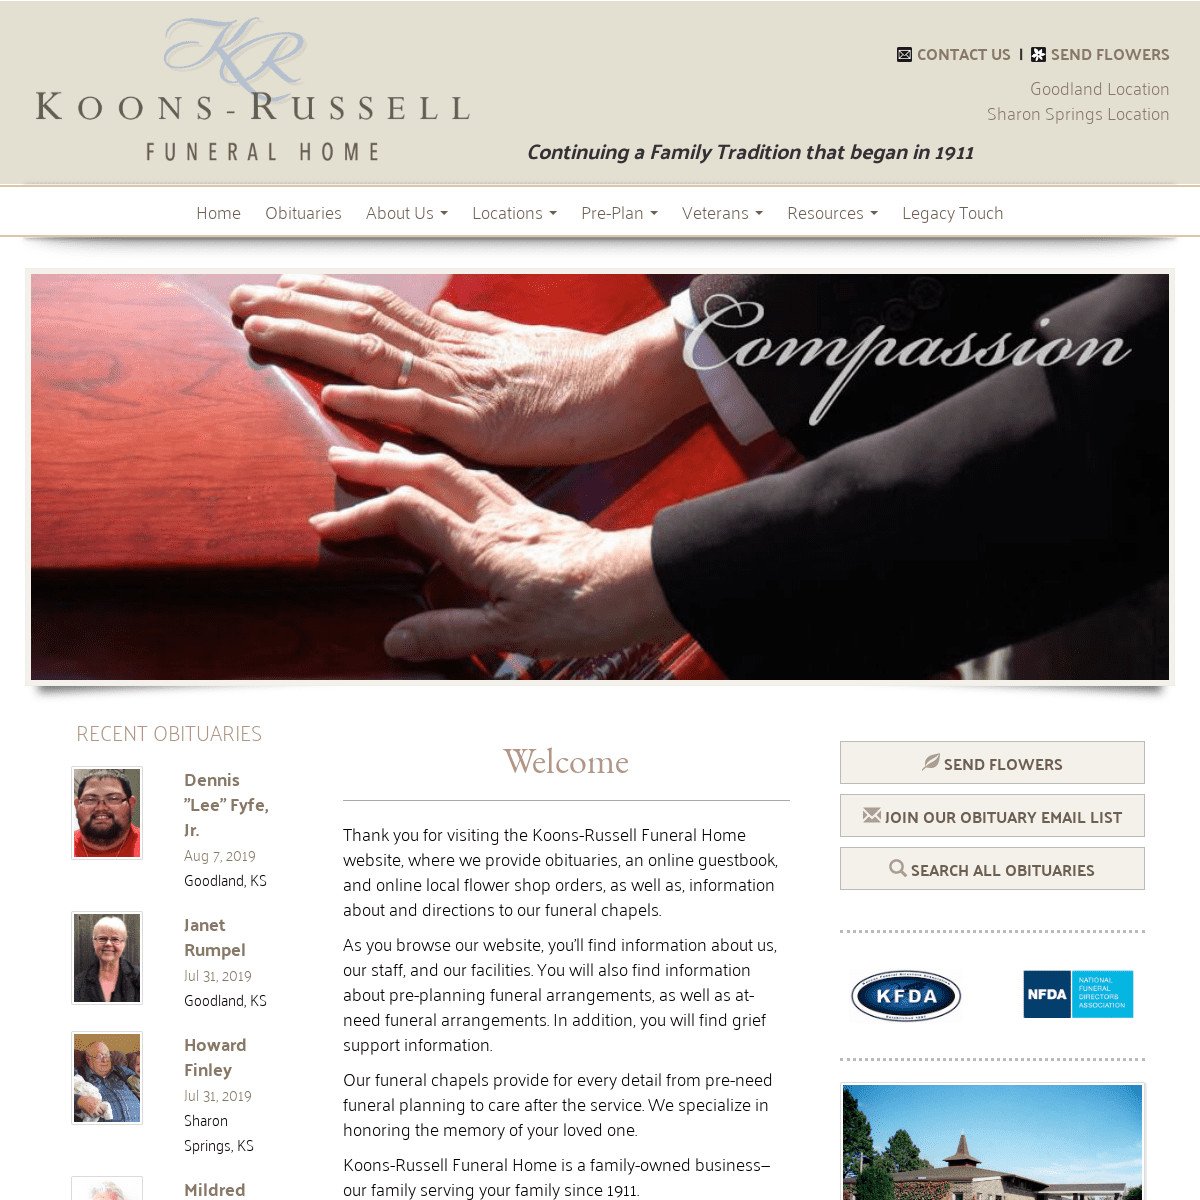 Koons-Russell Funeral Home | Goodland KS funeral home and cremation